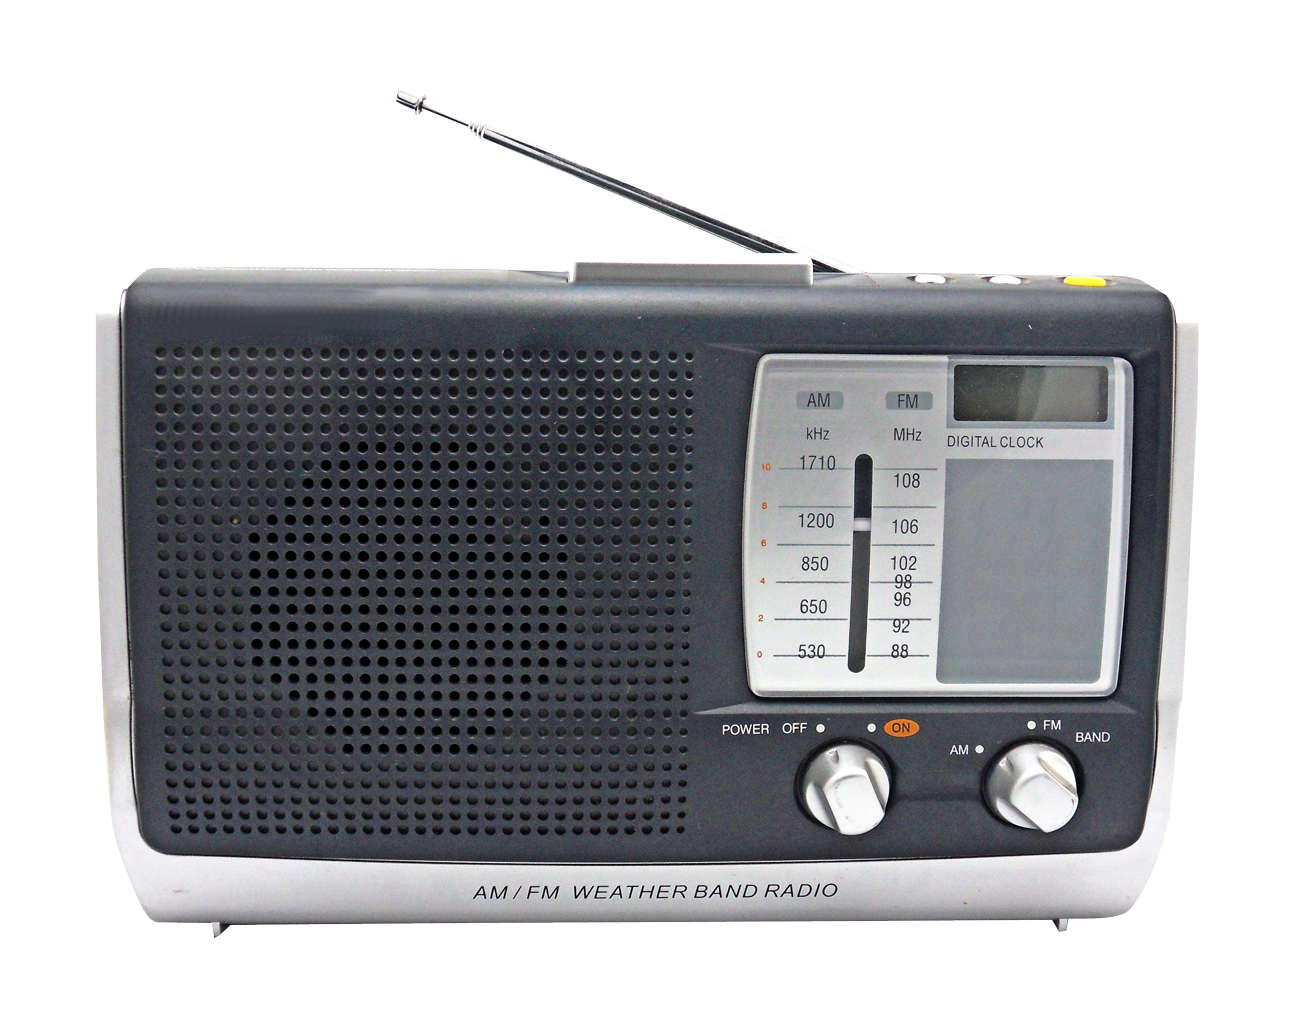 Radio Picture PNG Image